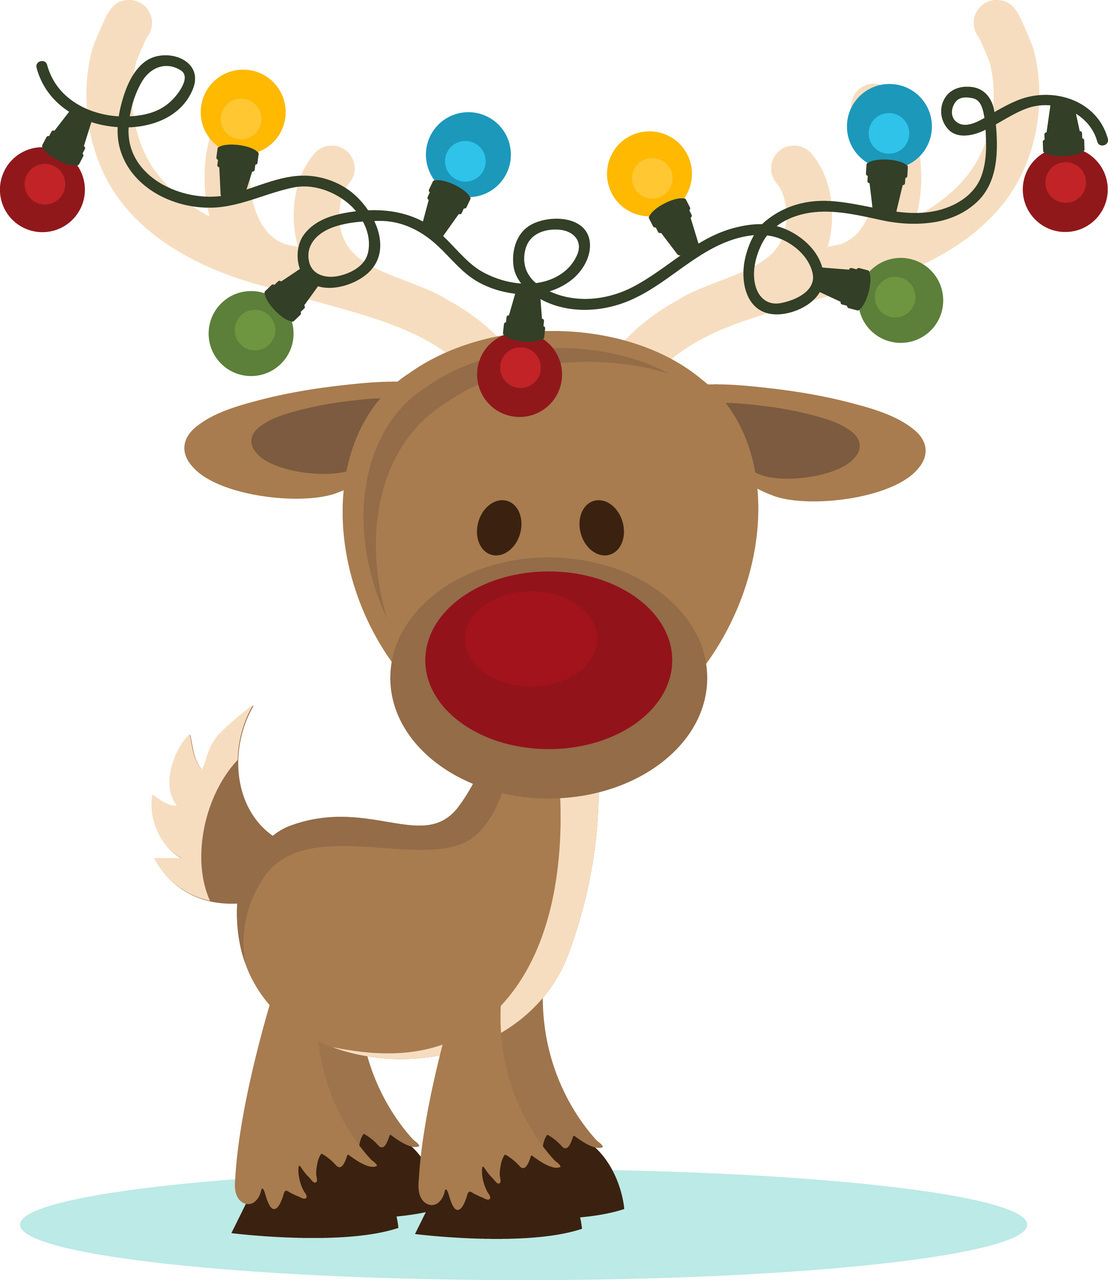 ... Christmas Clipart, Gingerbread Graphics. Ppbn Designs You Do Not Have Permission To Access This Page